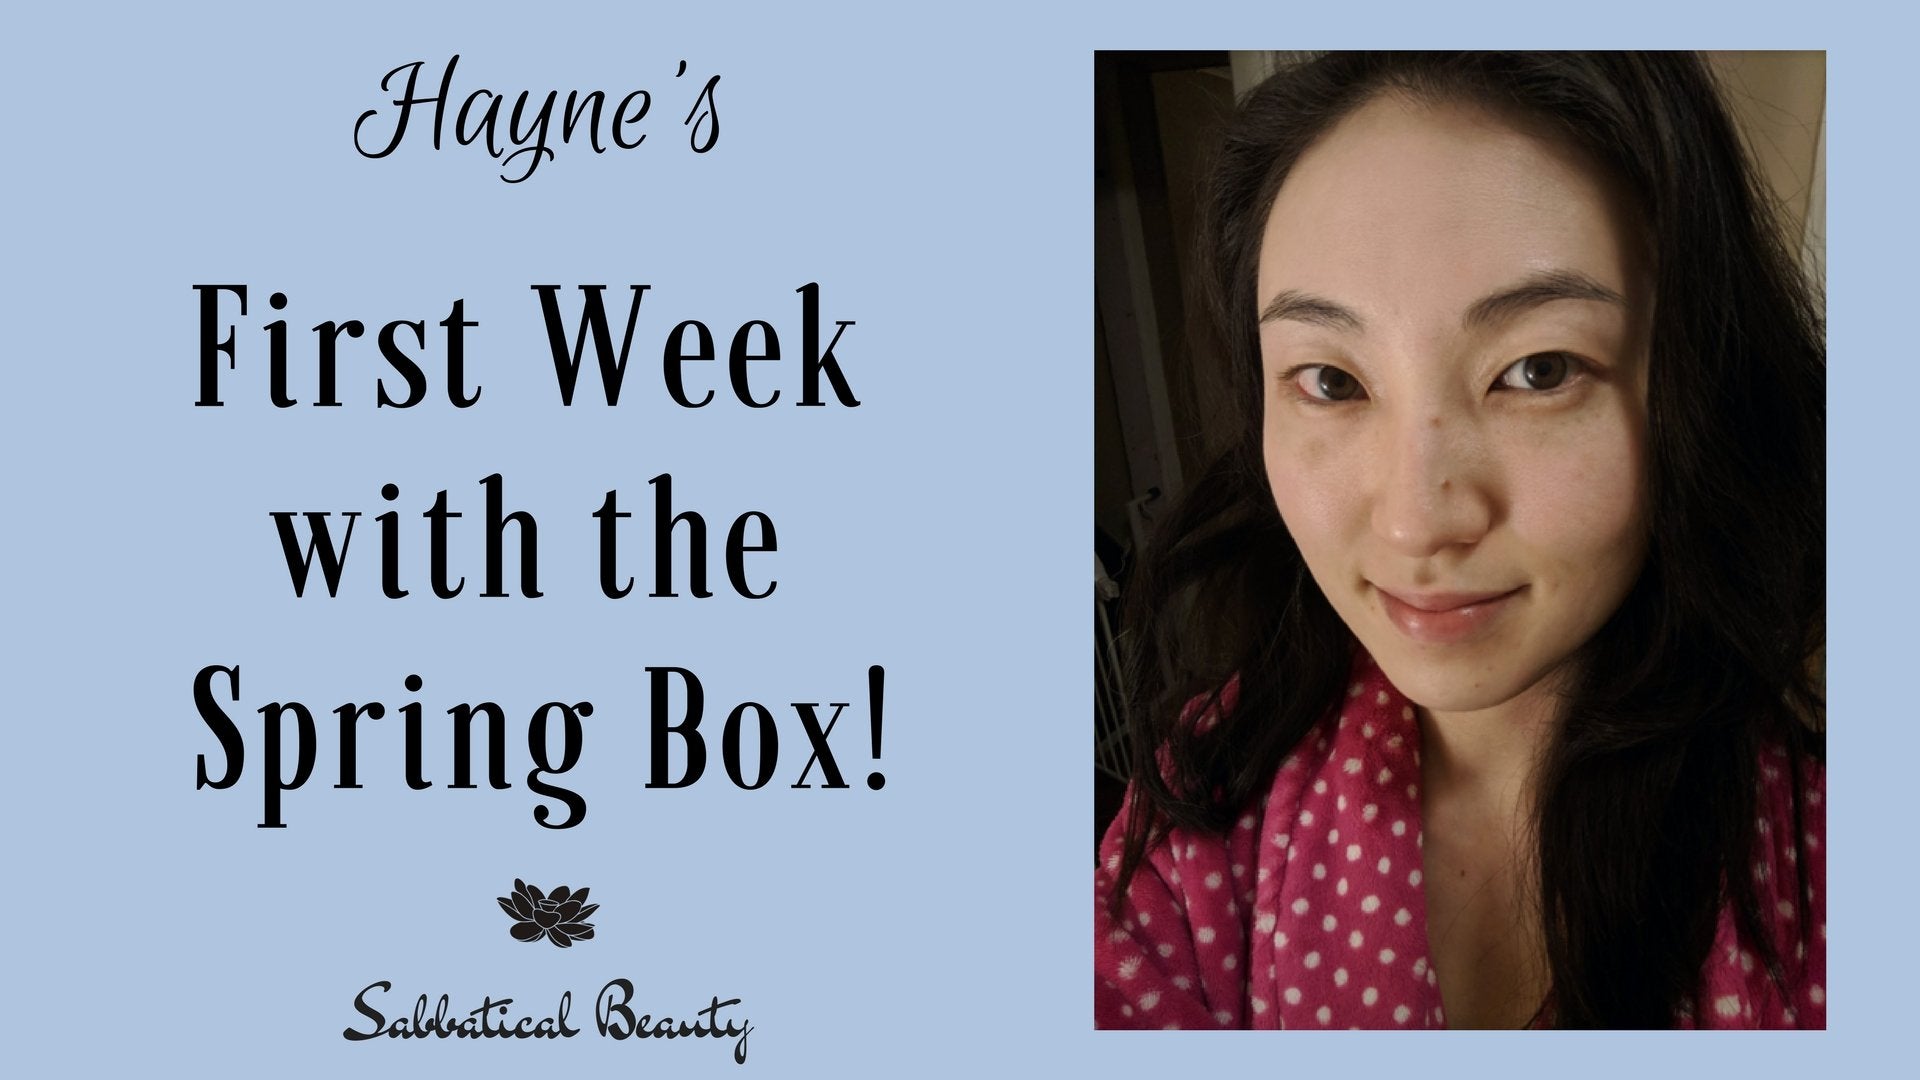 One Week with the Spring Box - Hayne's Update! - Sabbatical Beauty